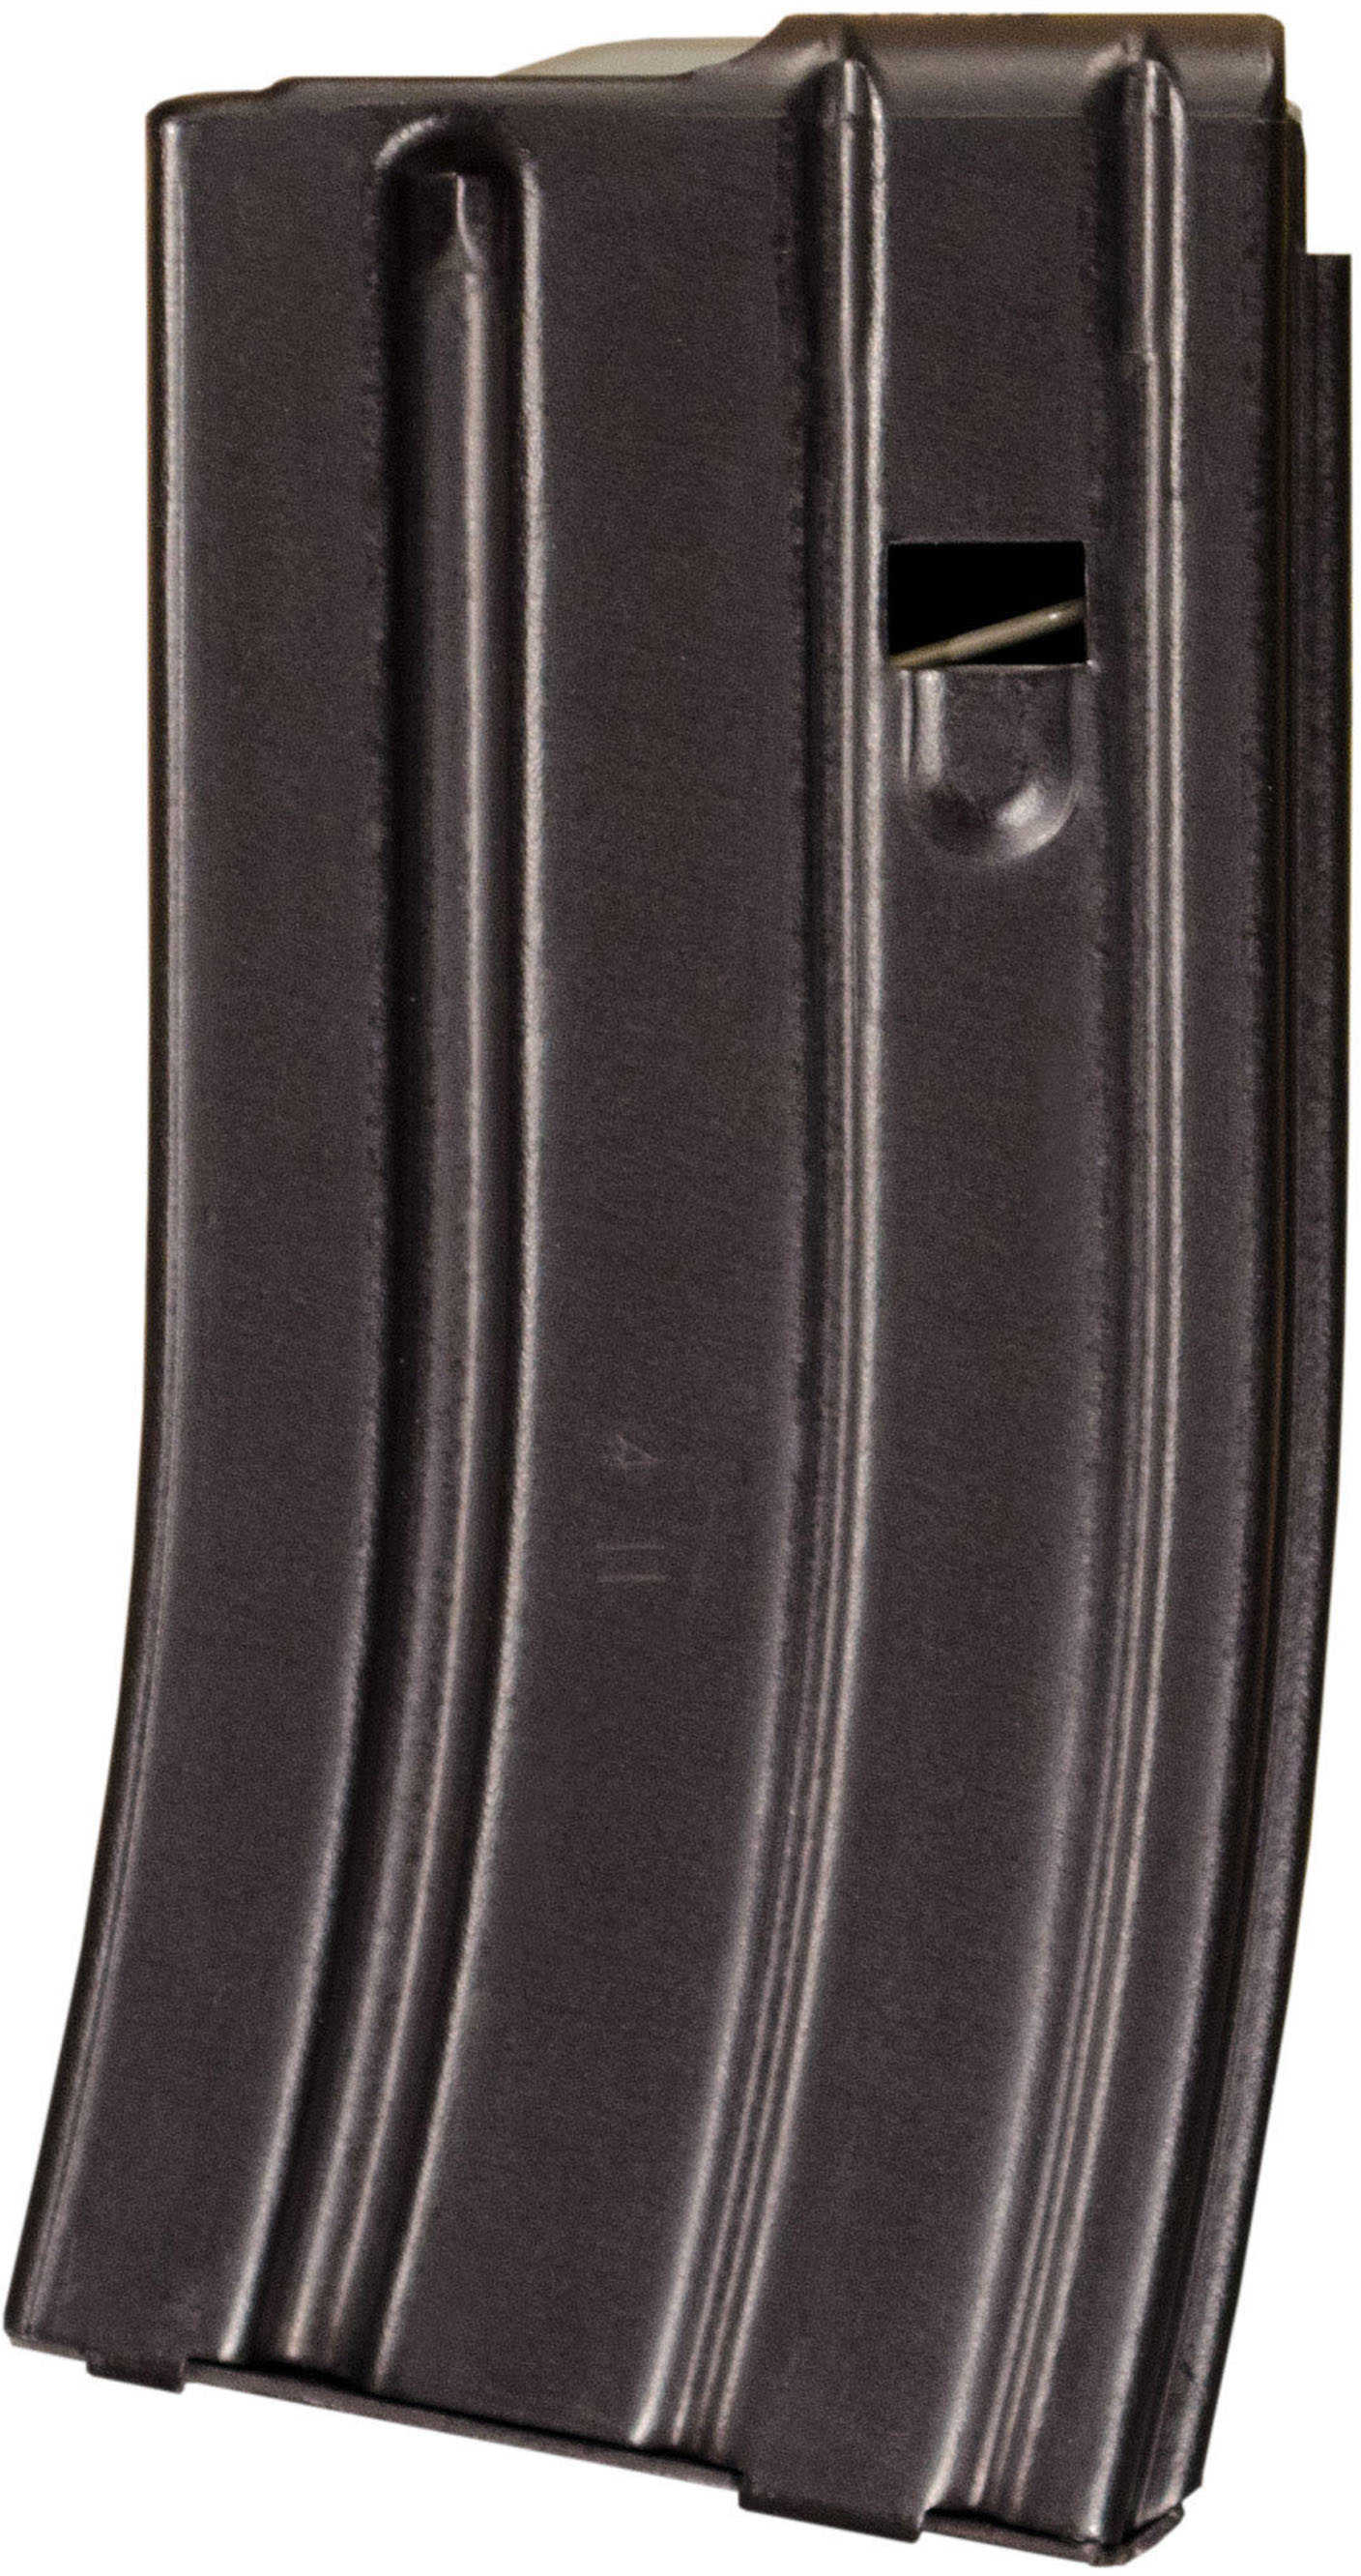 AR-15 Windham Weaponry Mag 223Rem 20Rd